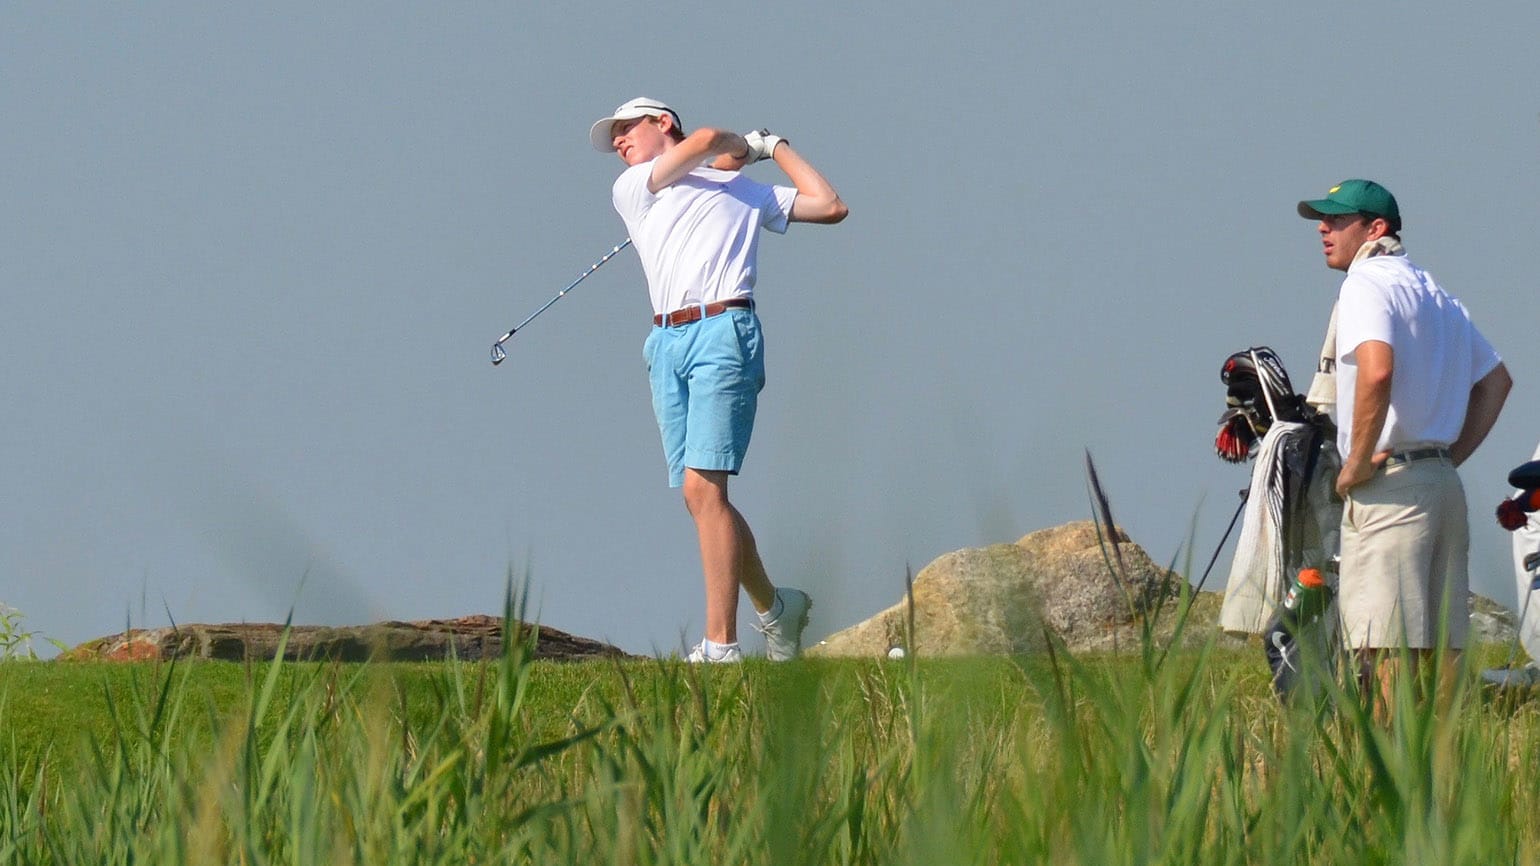 Jack Boatwright (left) gravitated to competitive golf much earlier than older brother, Graham (seen caddying), but the U.S. Amateur Four-Ball has given them both a chance to enjoy each other's company at a high level of competition. (Boatwright Family)